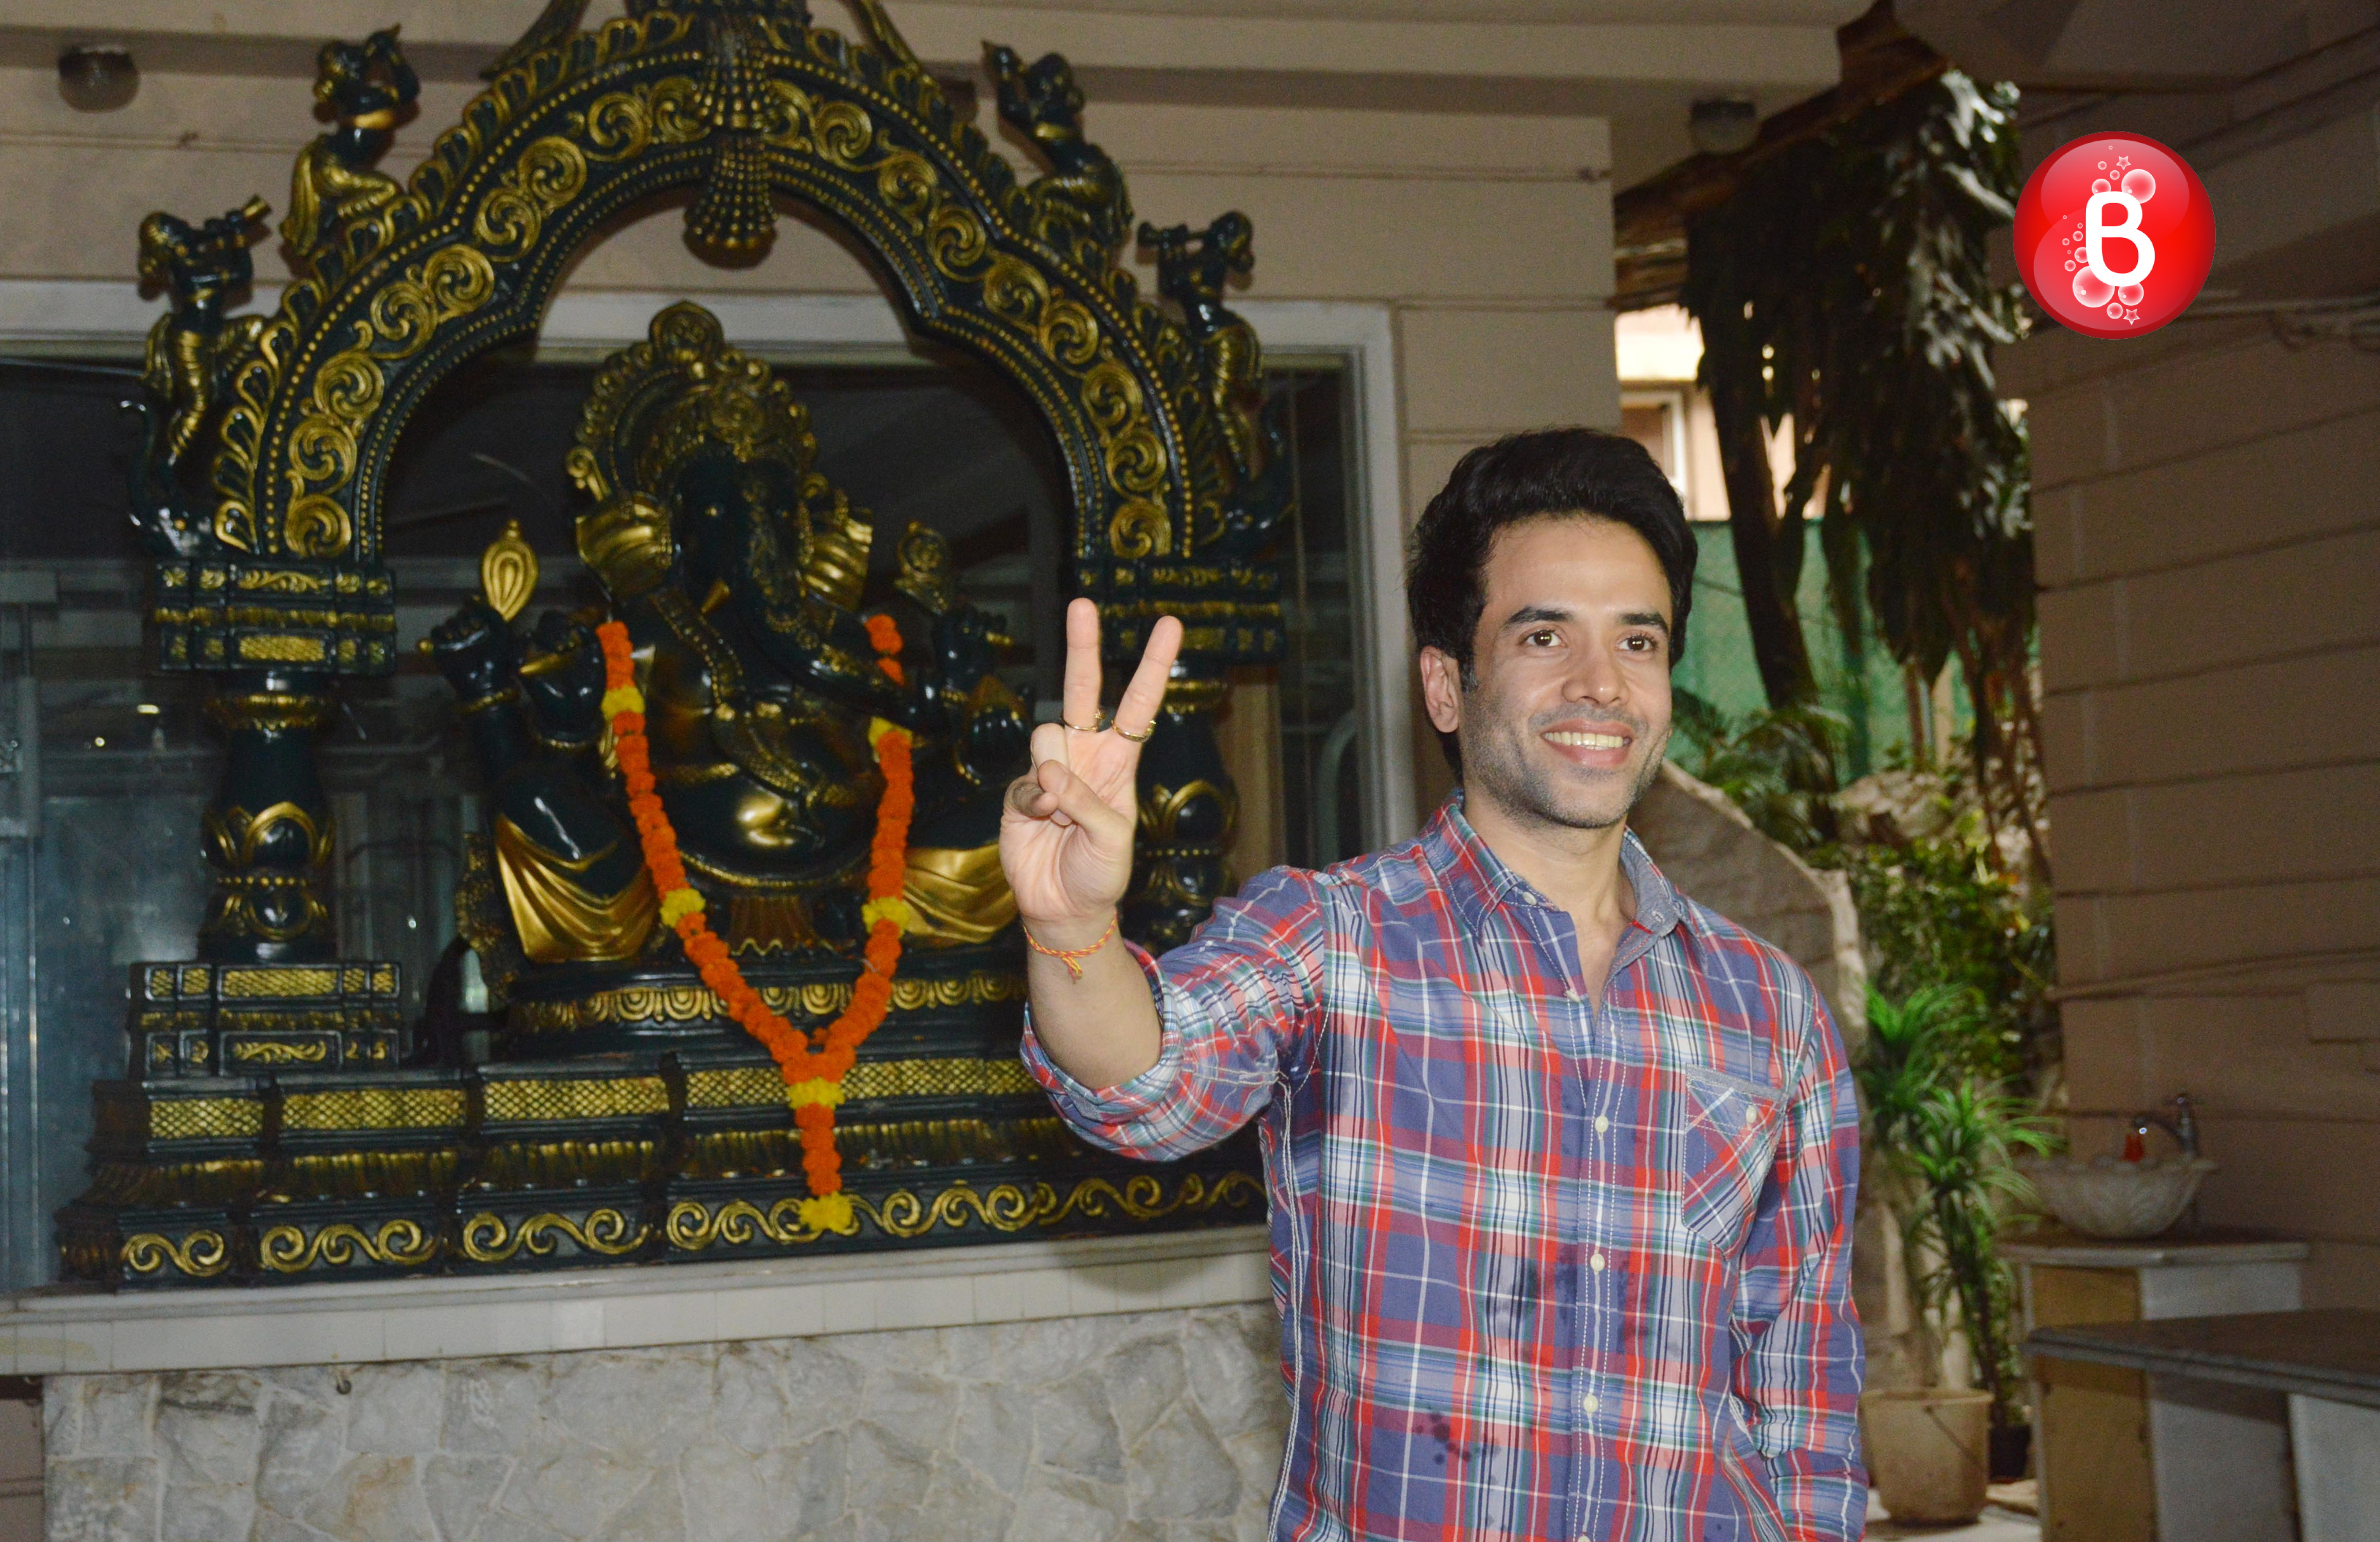 Tusshar Kapoor's Press Conference on turning father